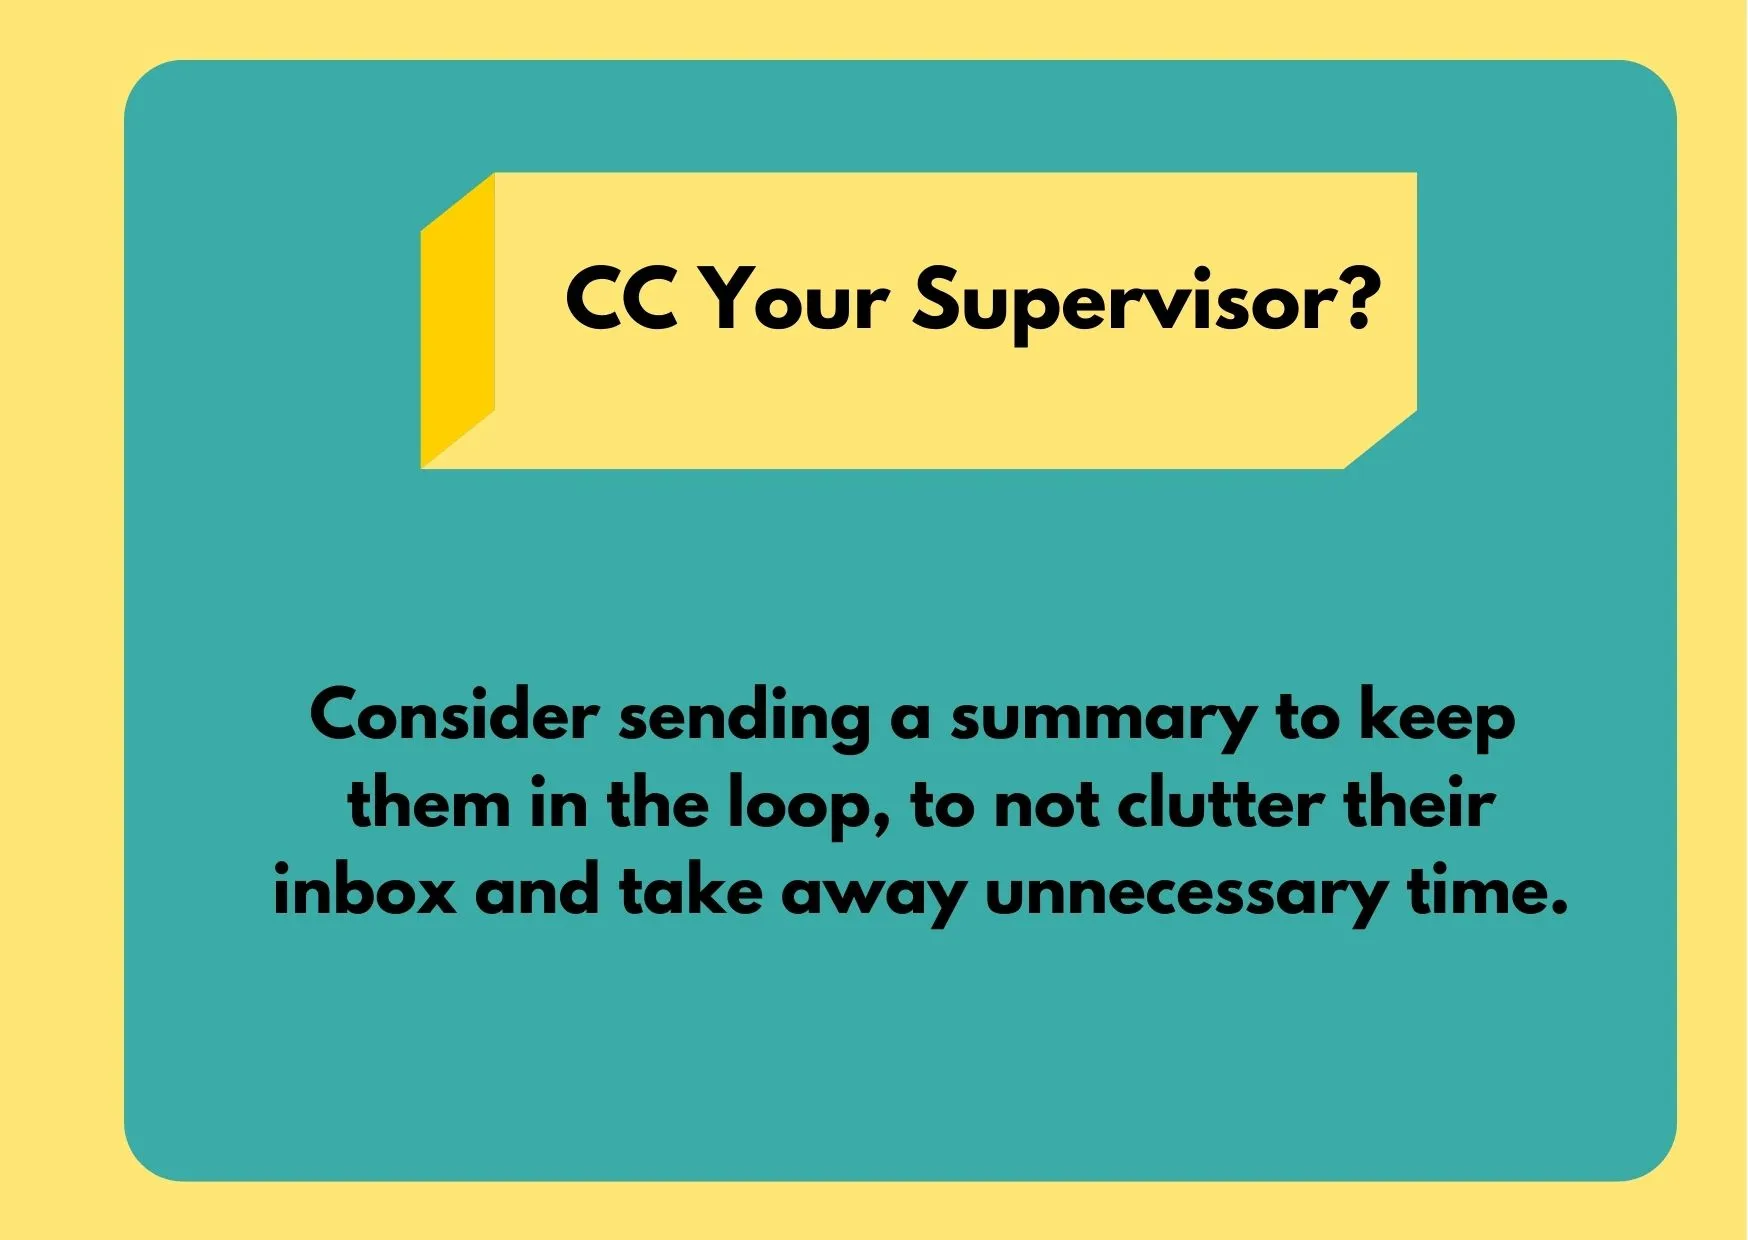 Graphic asking if you should CC your supervisor. The answer is that you should consider whether all that email back and forth is needed, and whether a summary sent to your boss could be a better choice.